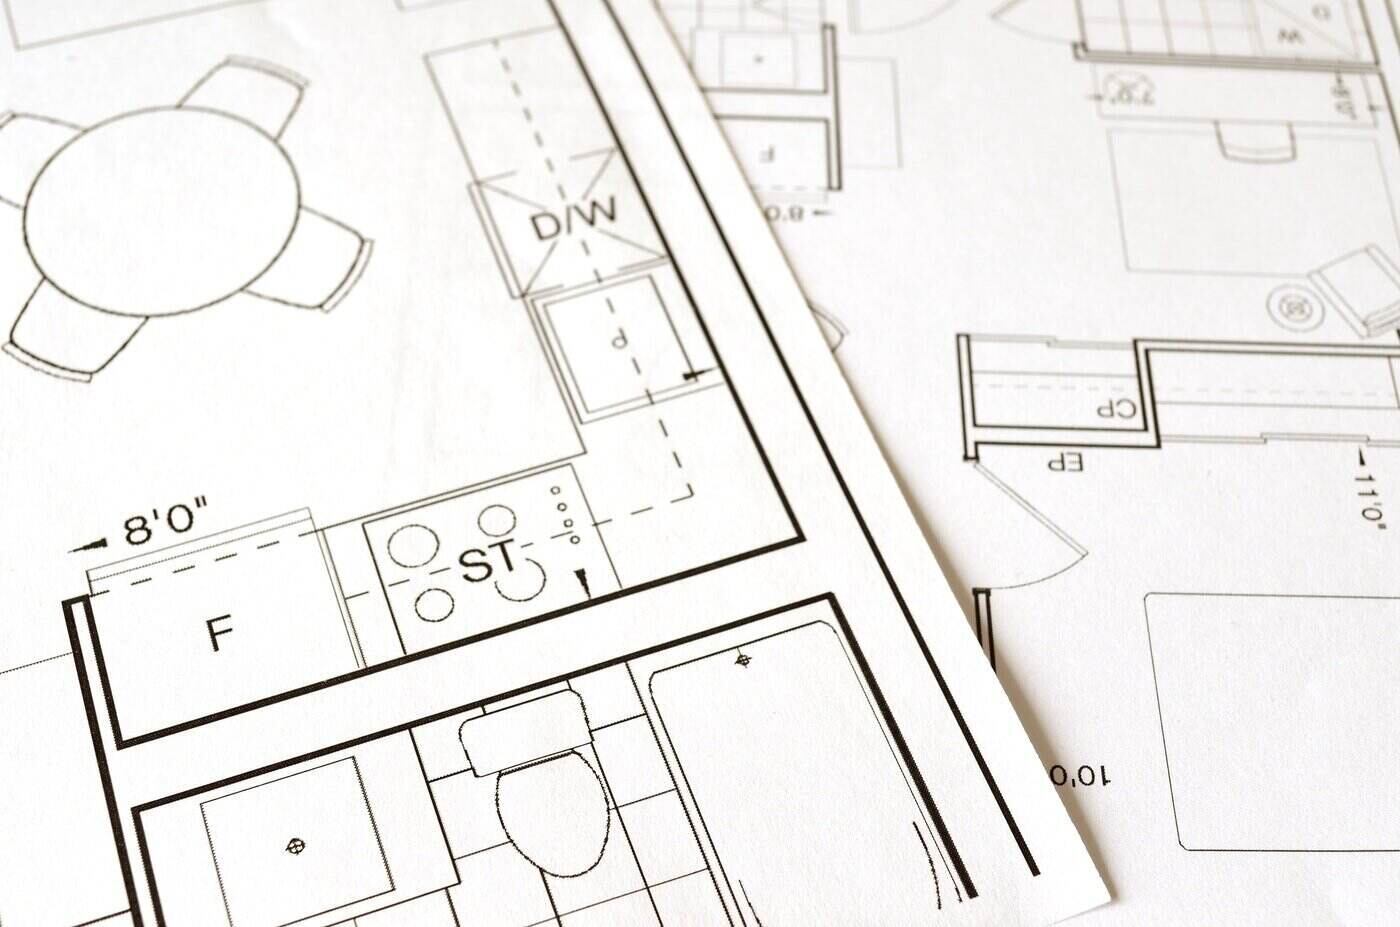 architectural plans - reasons to hire an architect for your self-building plans